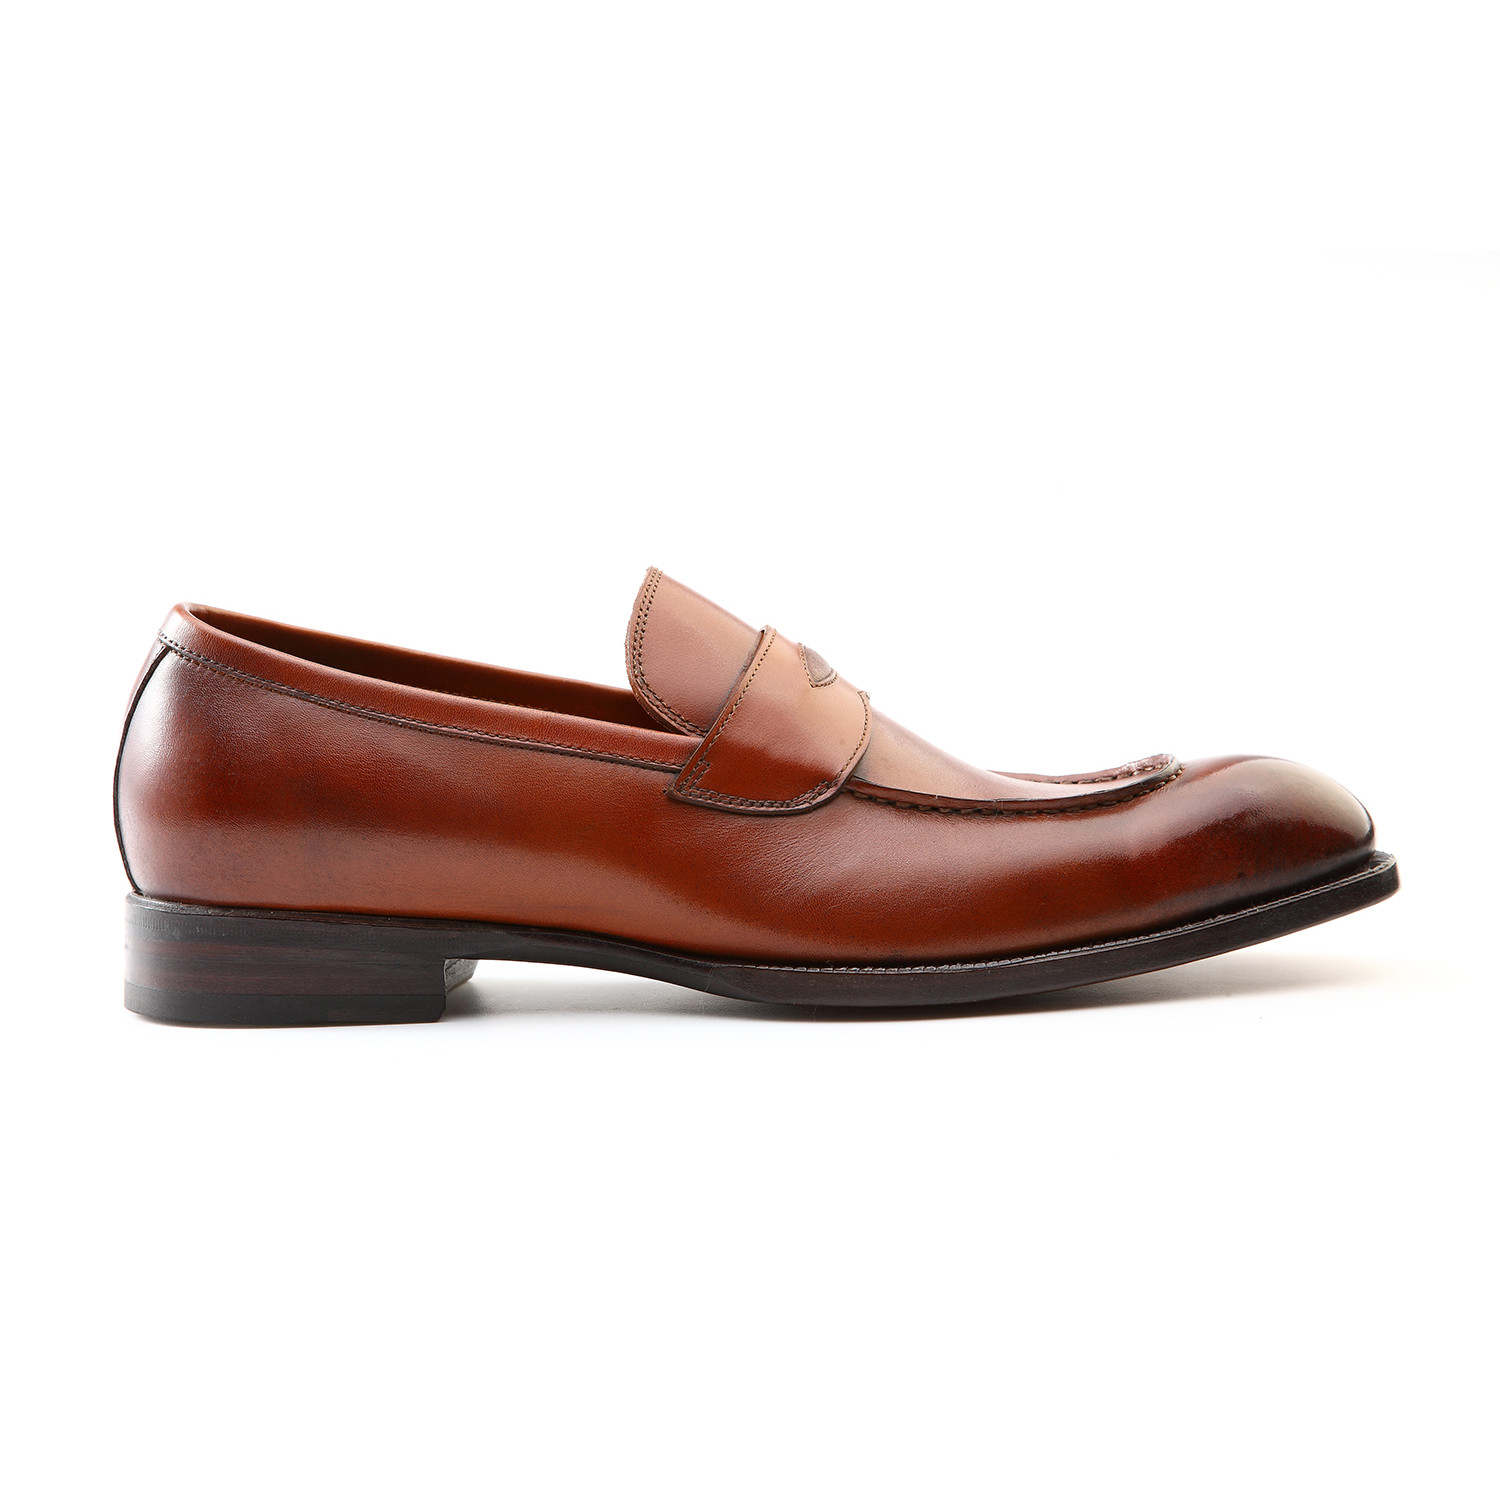 Philip Classic Penny Loafer // Brown (Euro: 41) - Handmade Brogues ...